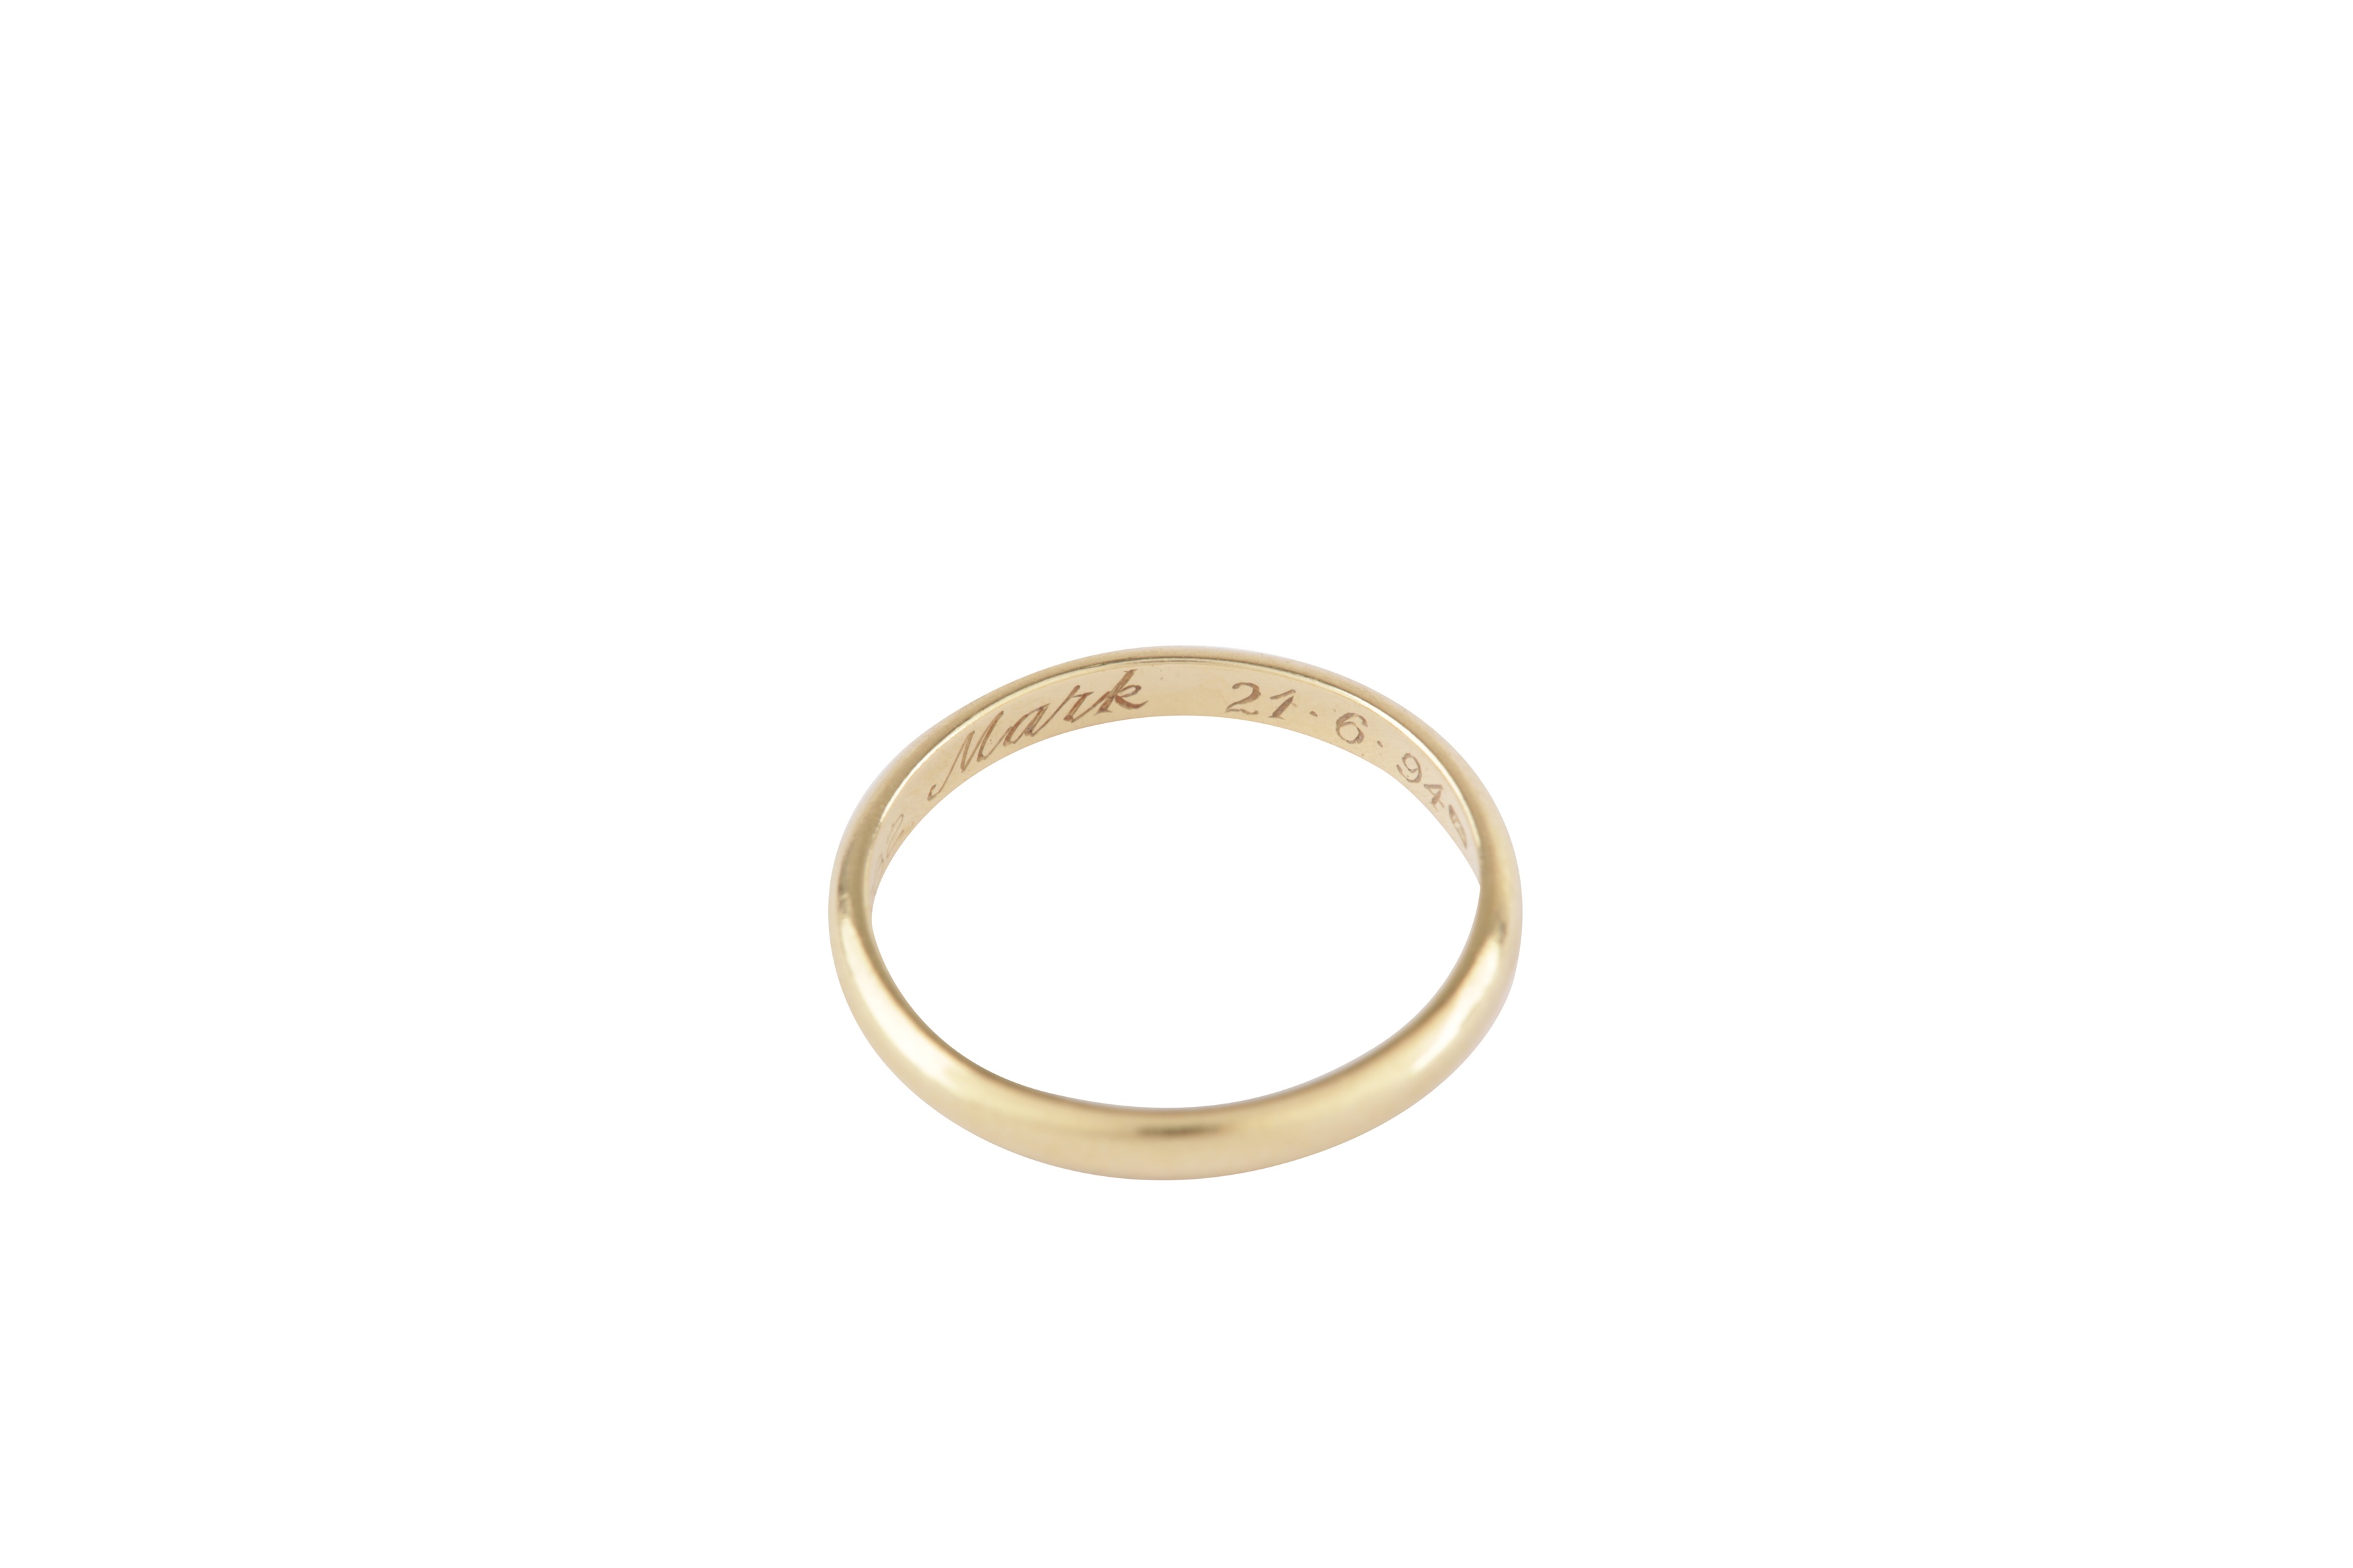 An 18 carat gold wedding band, by Cartier - Image 2 of 3